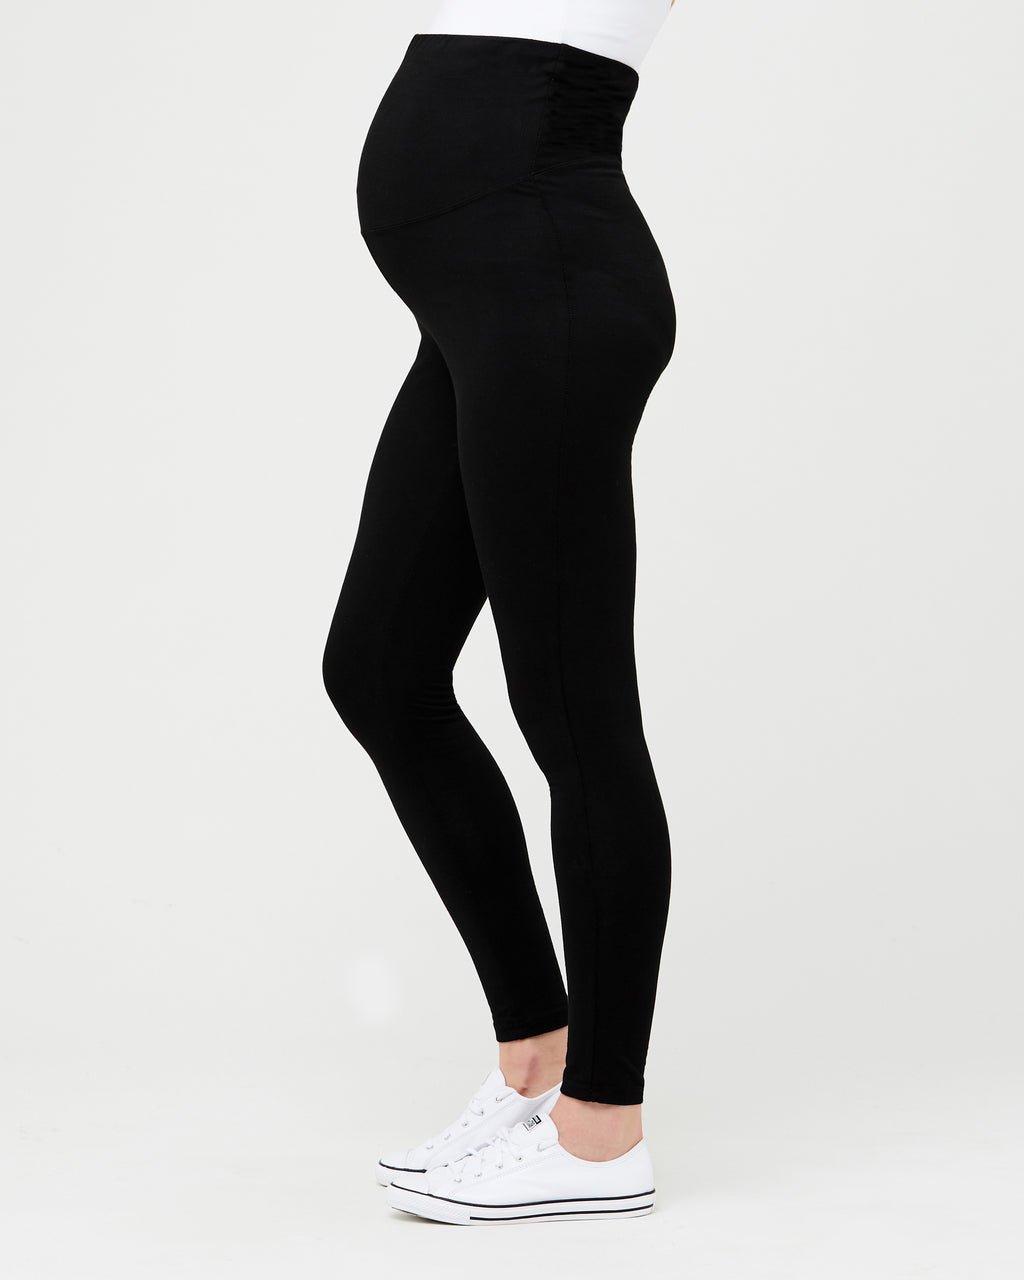 Rock Your Bump | Your online maternity clothing and nursing wear store